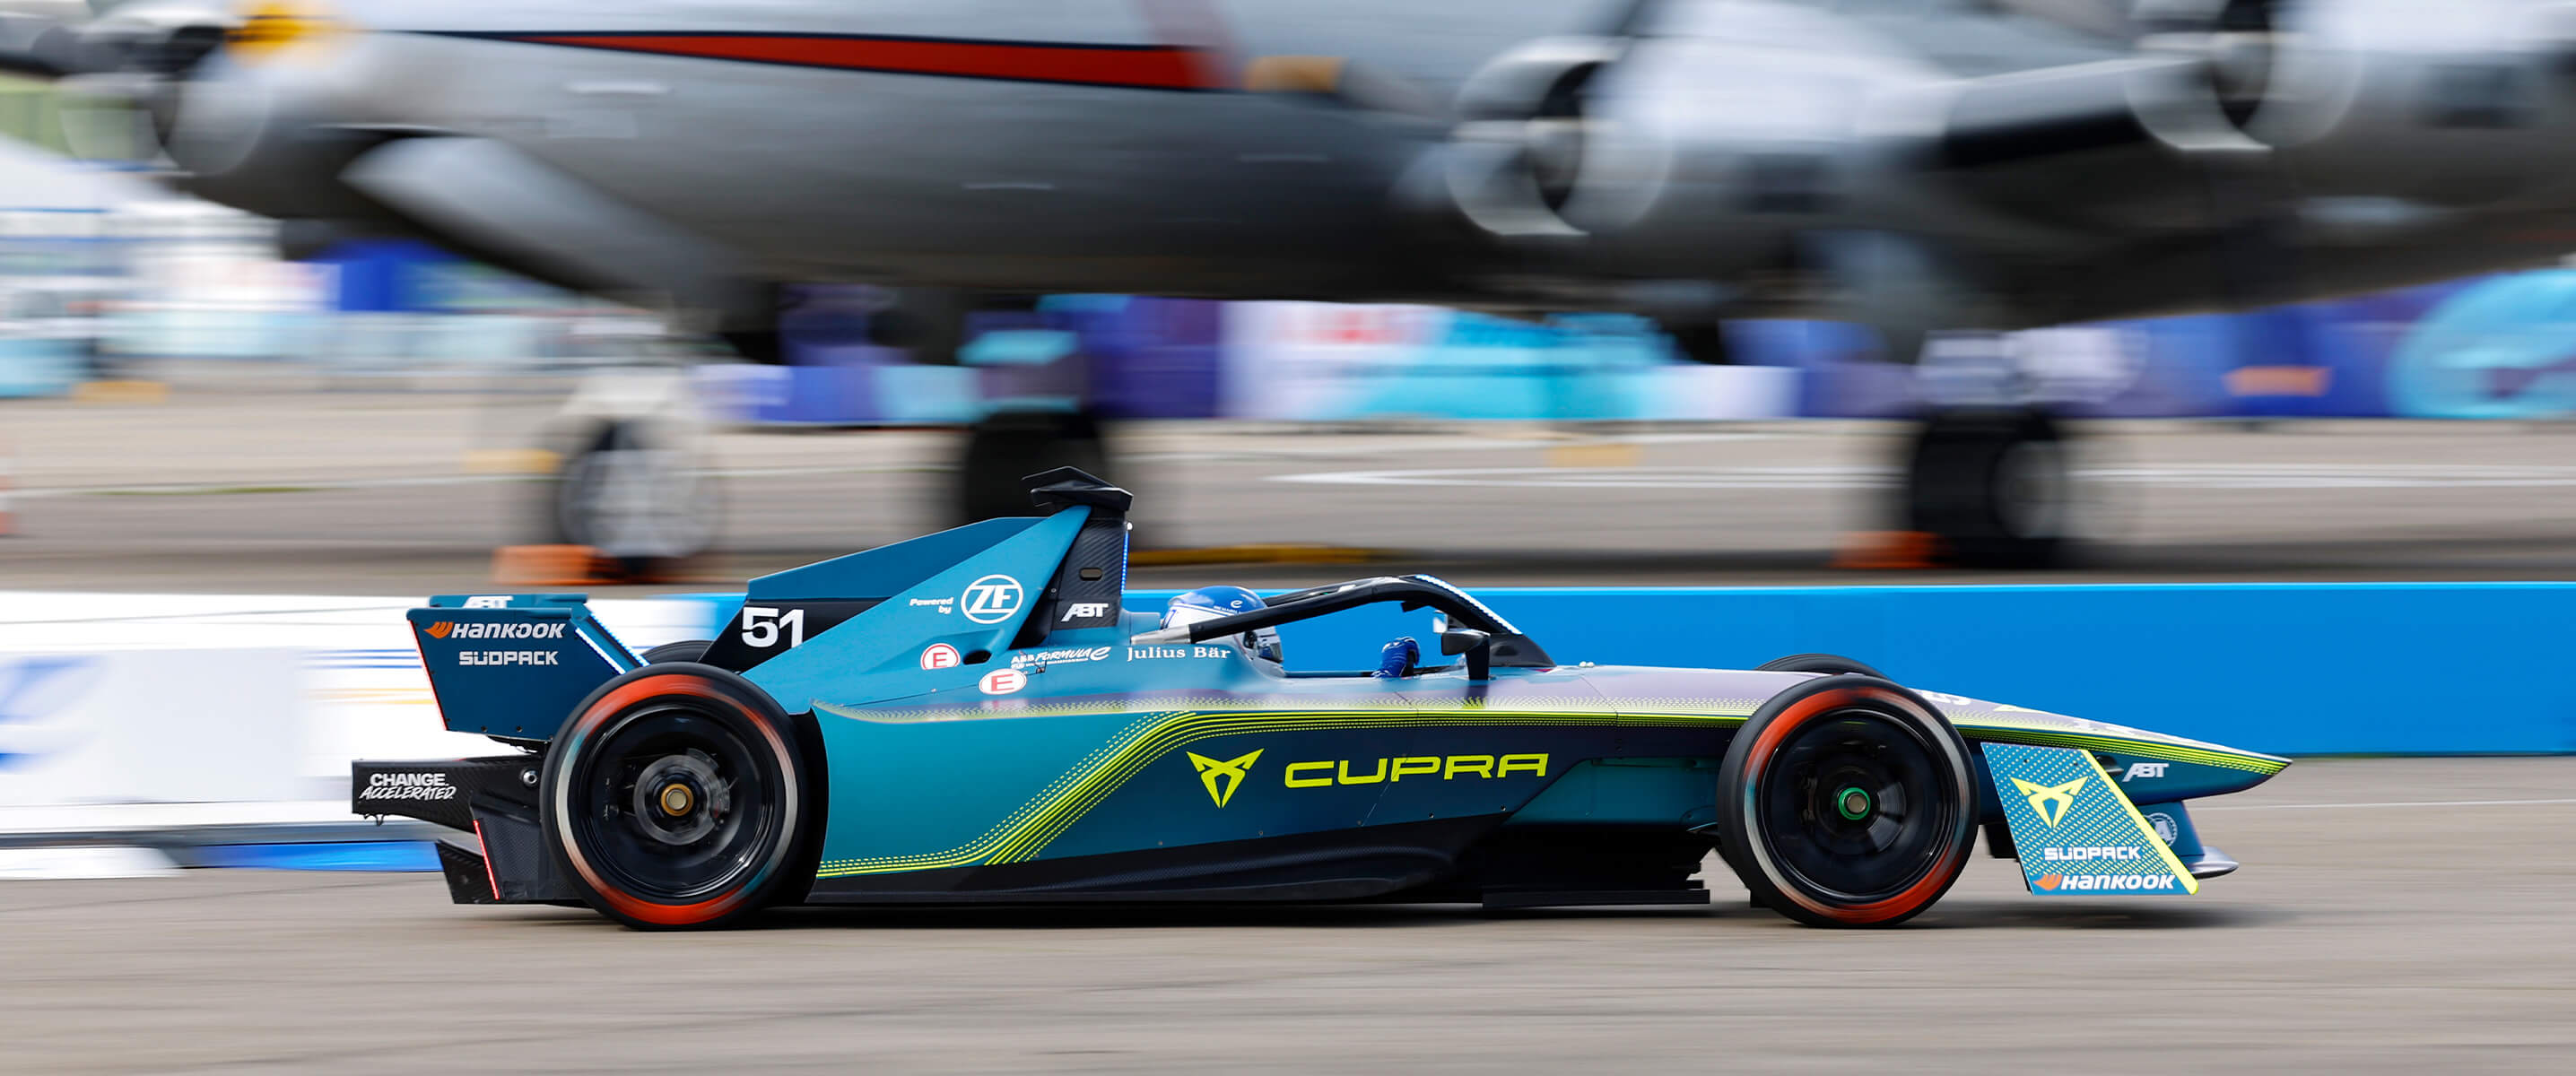 CUPRA Formula E car driving at speed on a racetrack